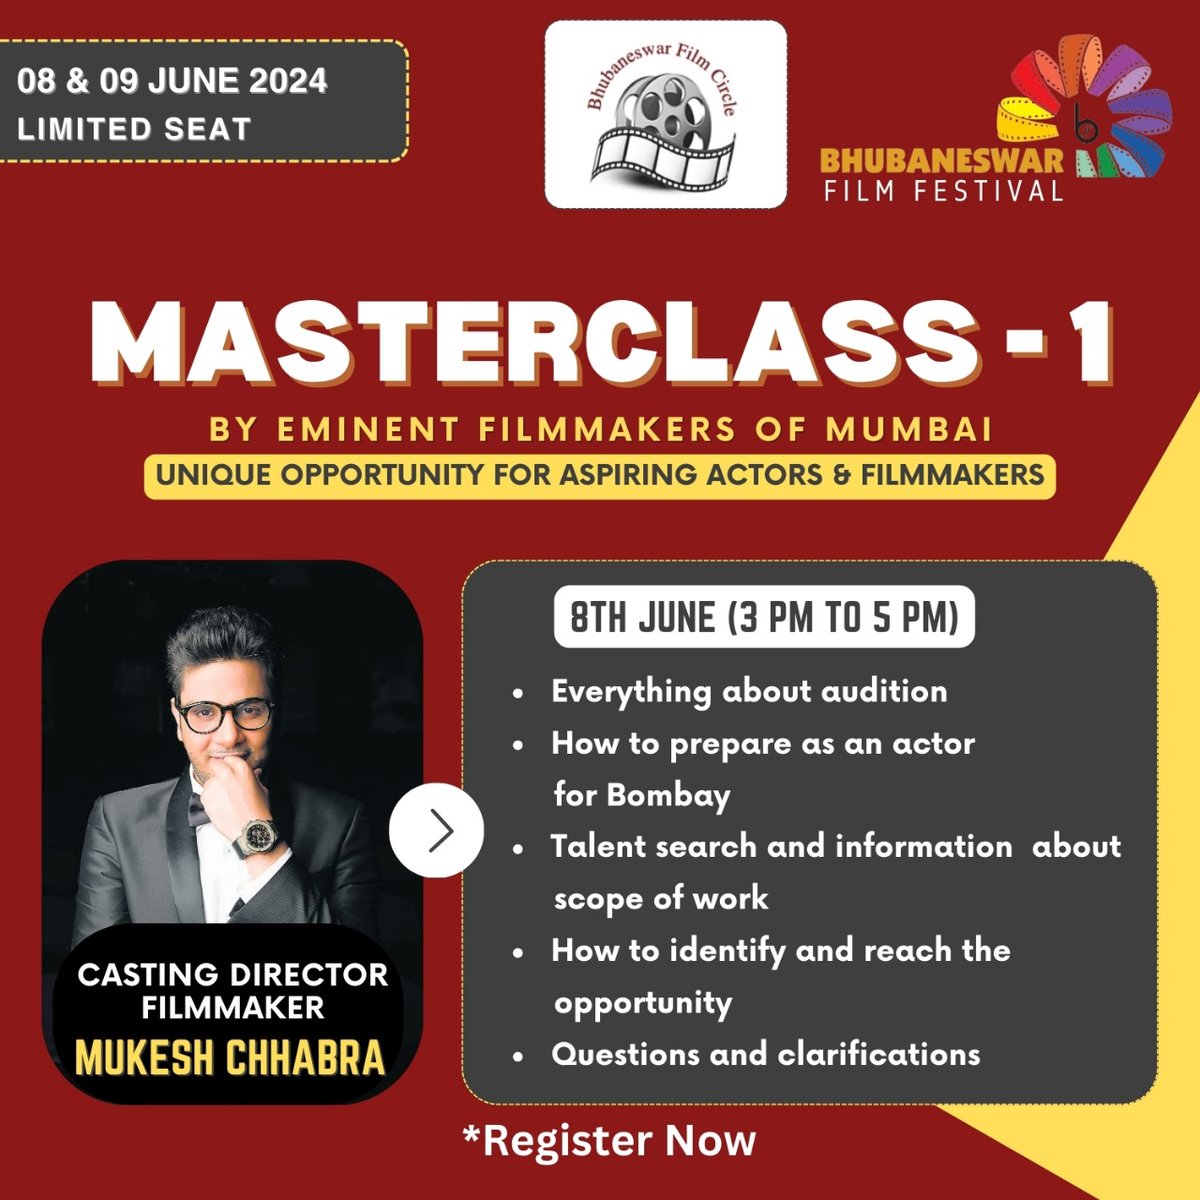 Aspiring Filmmakers & Actors! Join the Masterclasses on Film Acting & Screenplay Writing at #BhubaneswarFilmFestival from Bollywood stalwarts @CastingChhabra & @raiamitbabulal. Register now at the Google Form below - forms.gle/uBFLevLstjb9Sw…